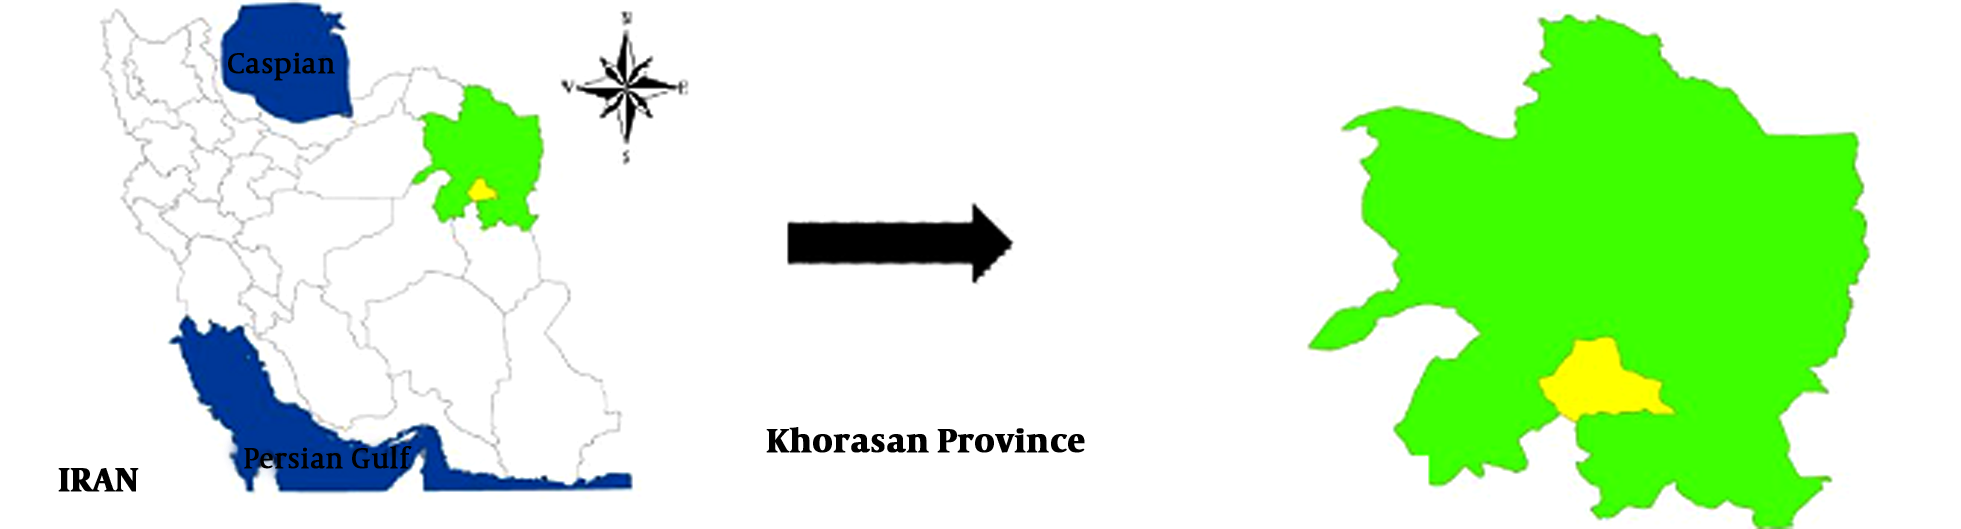 Geological location of Gonabad city in Iran and Khorasan Razavi province